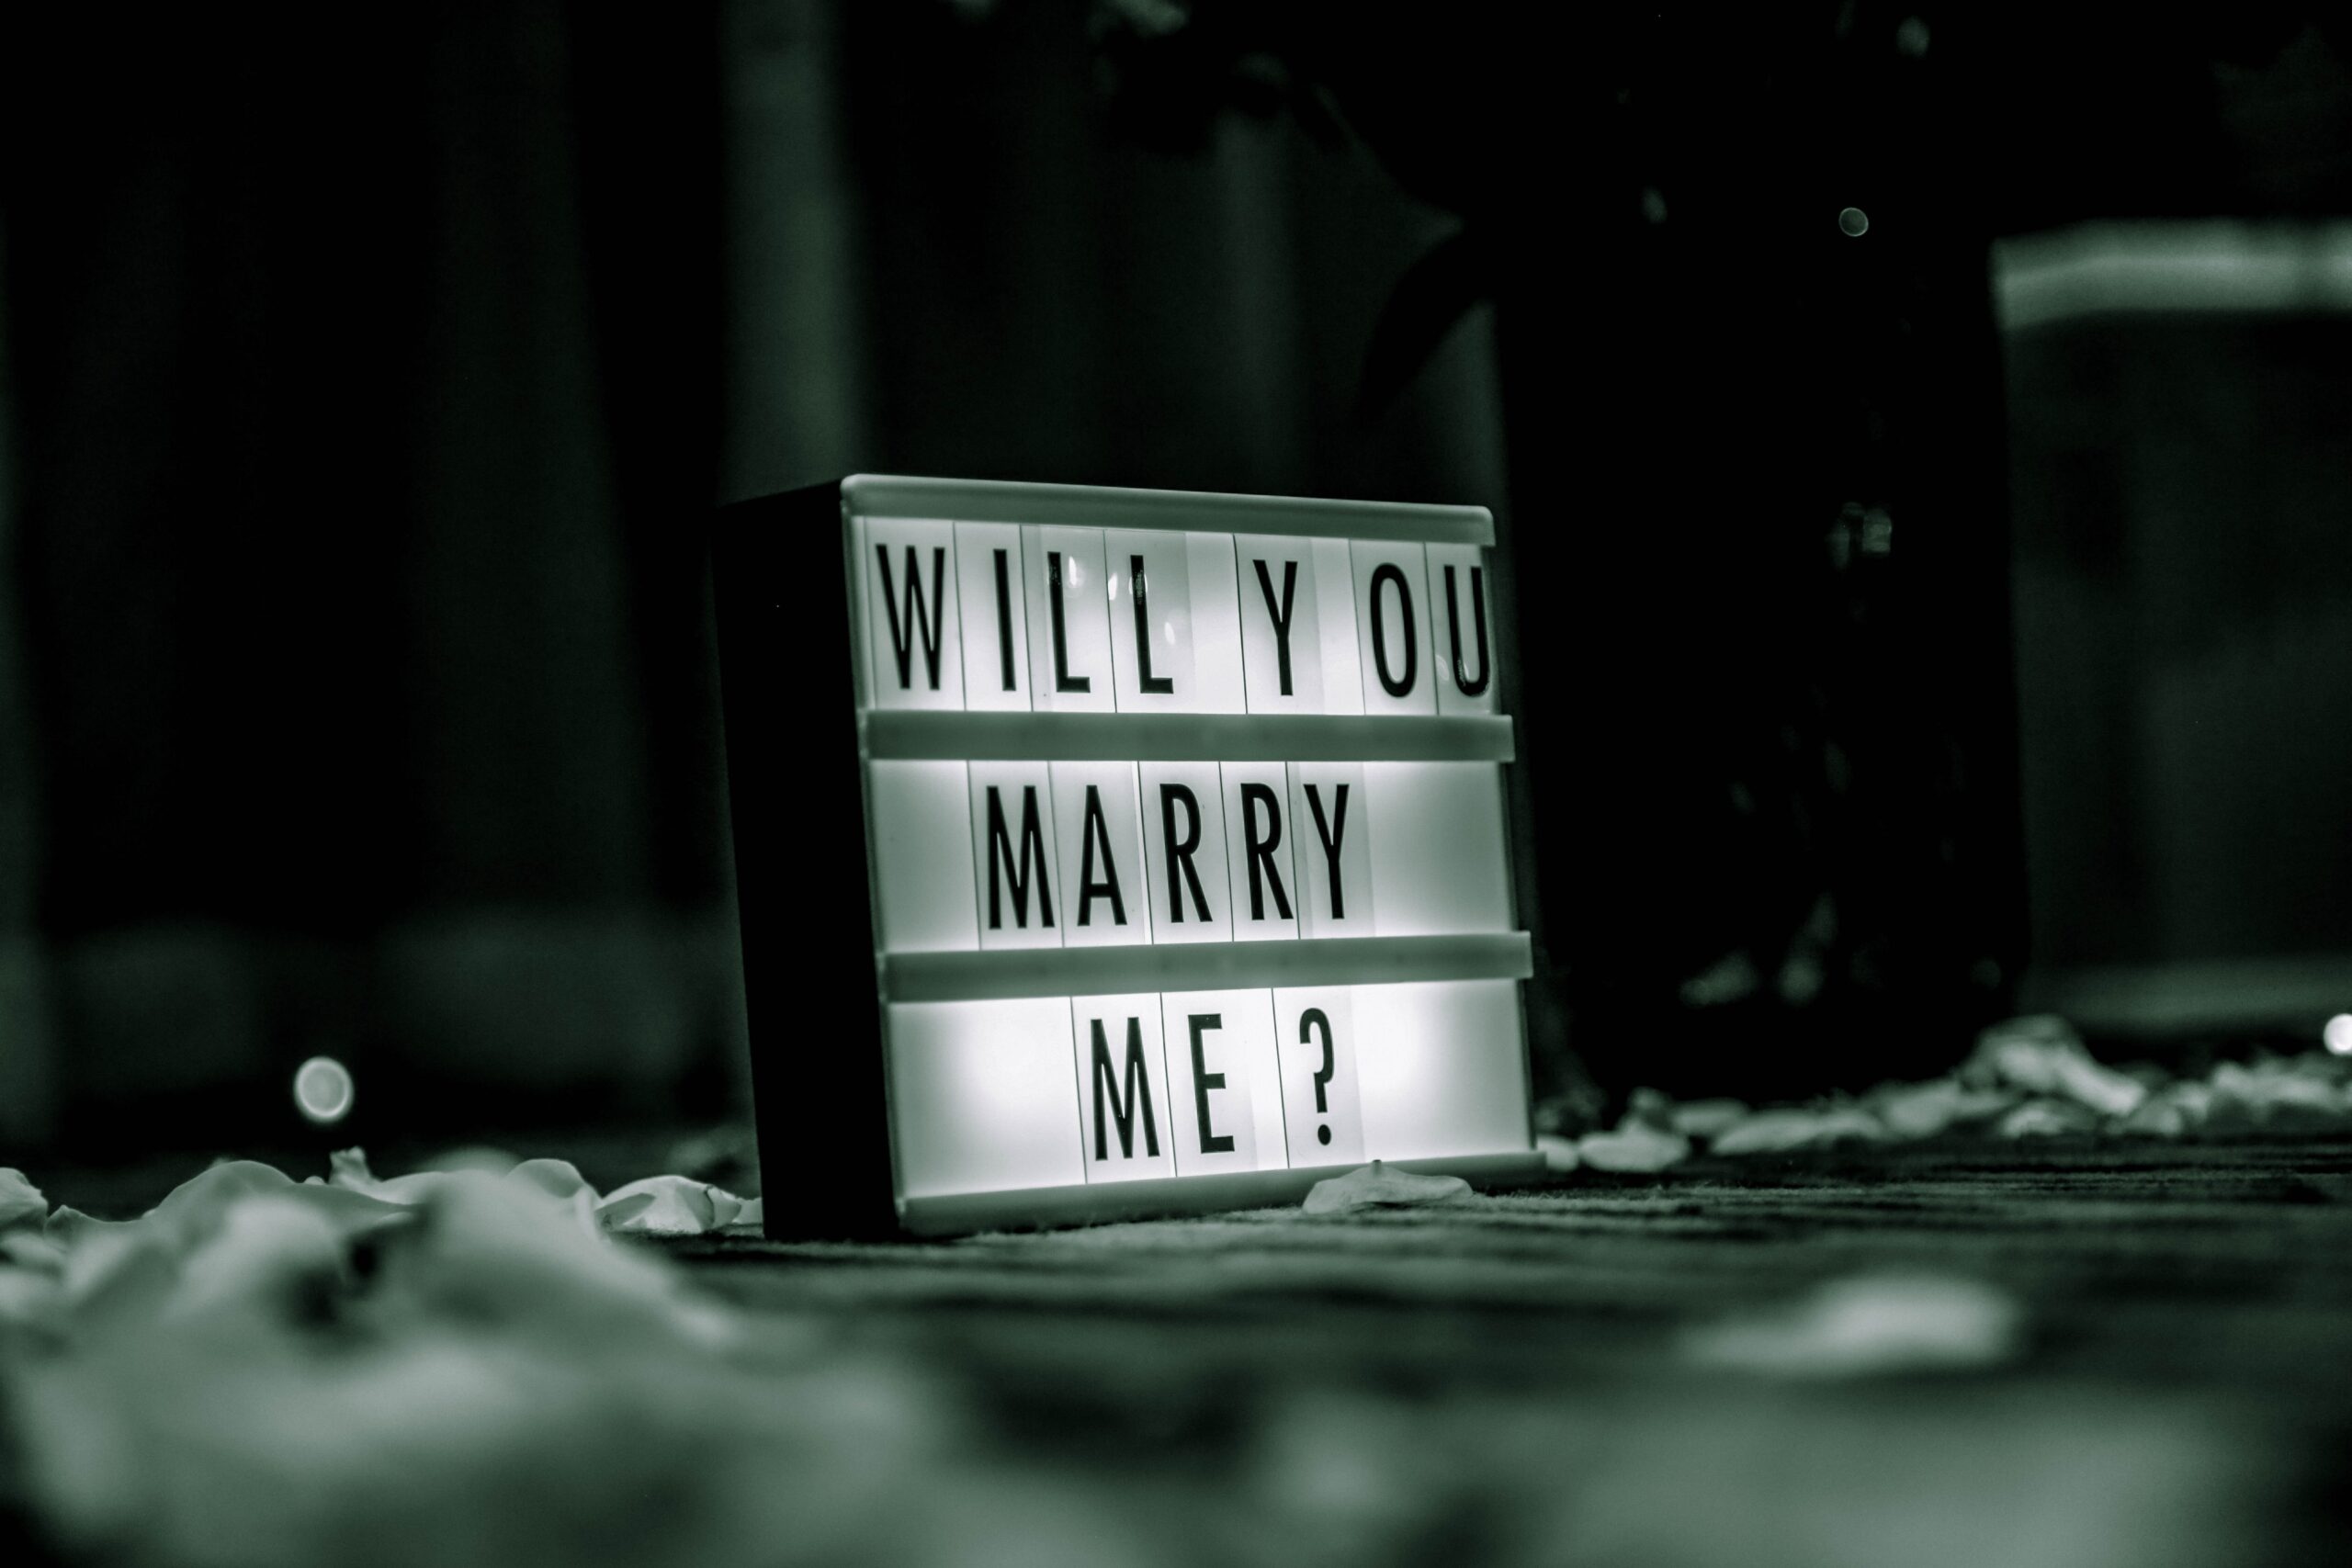 The question asked to be engaged